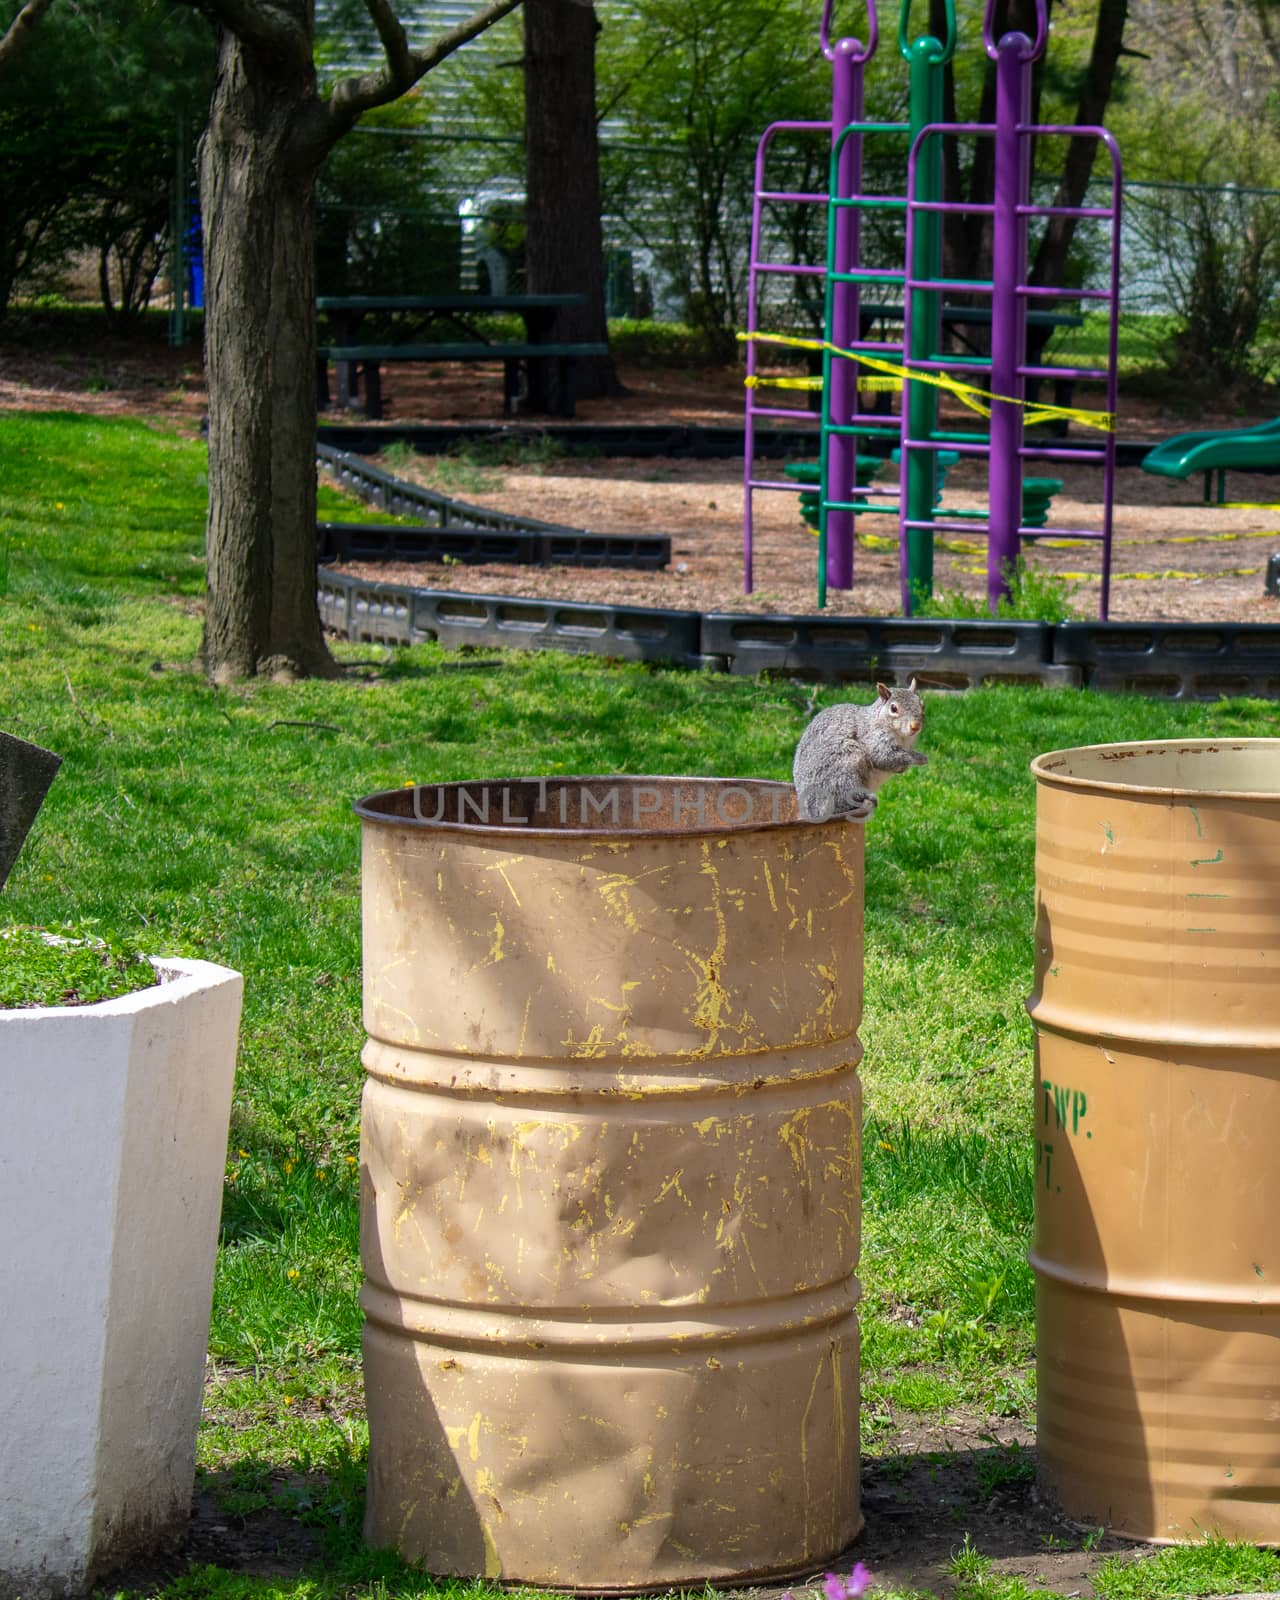 A Small Squirrel Sitting on a Metal Trash Can at a Park